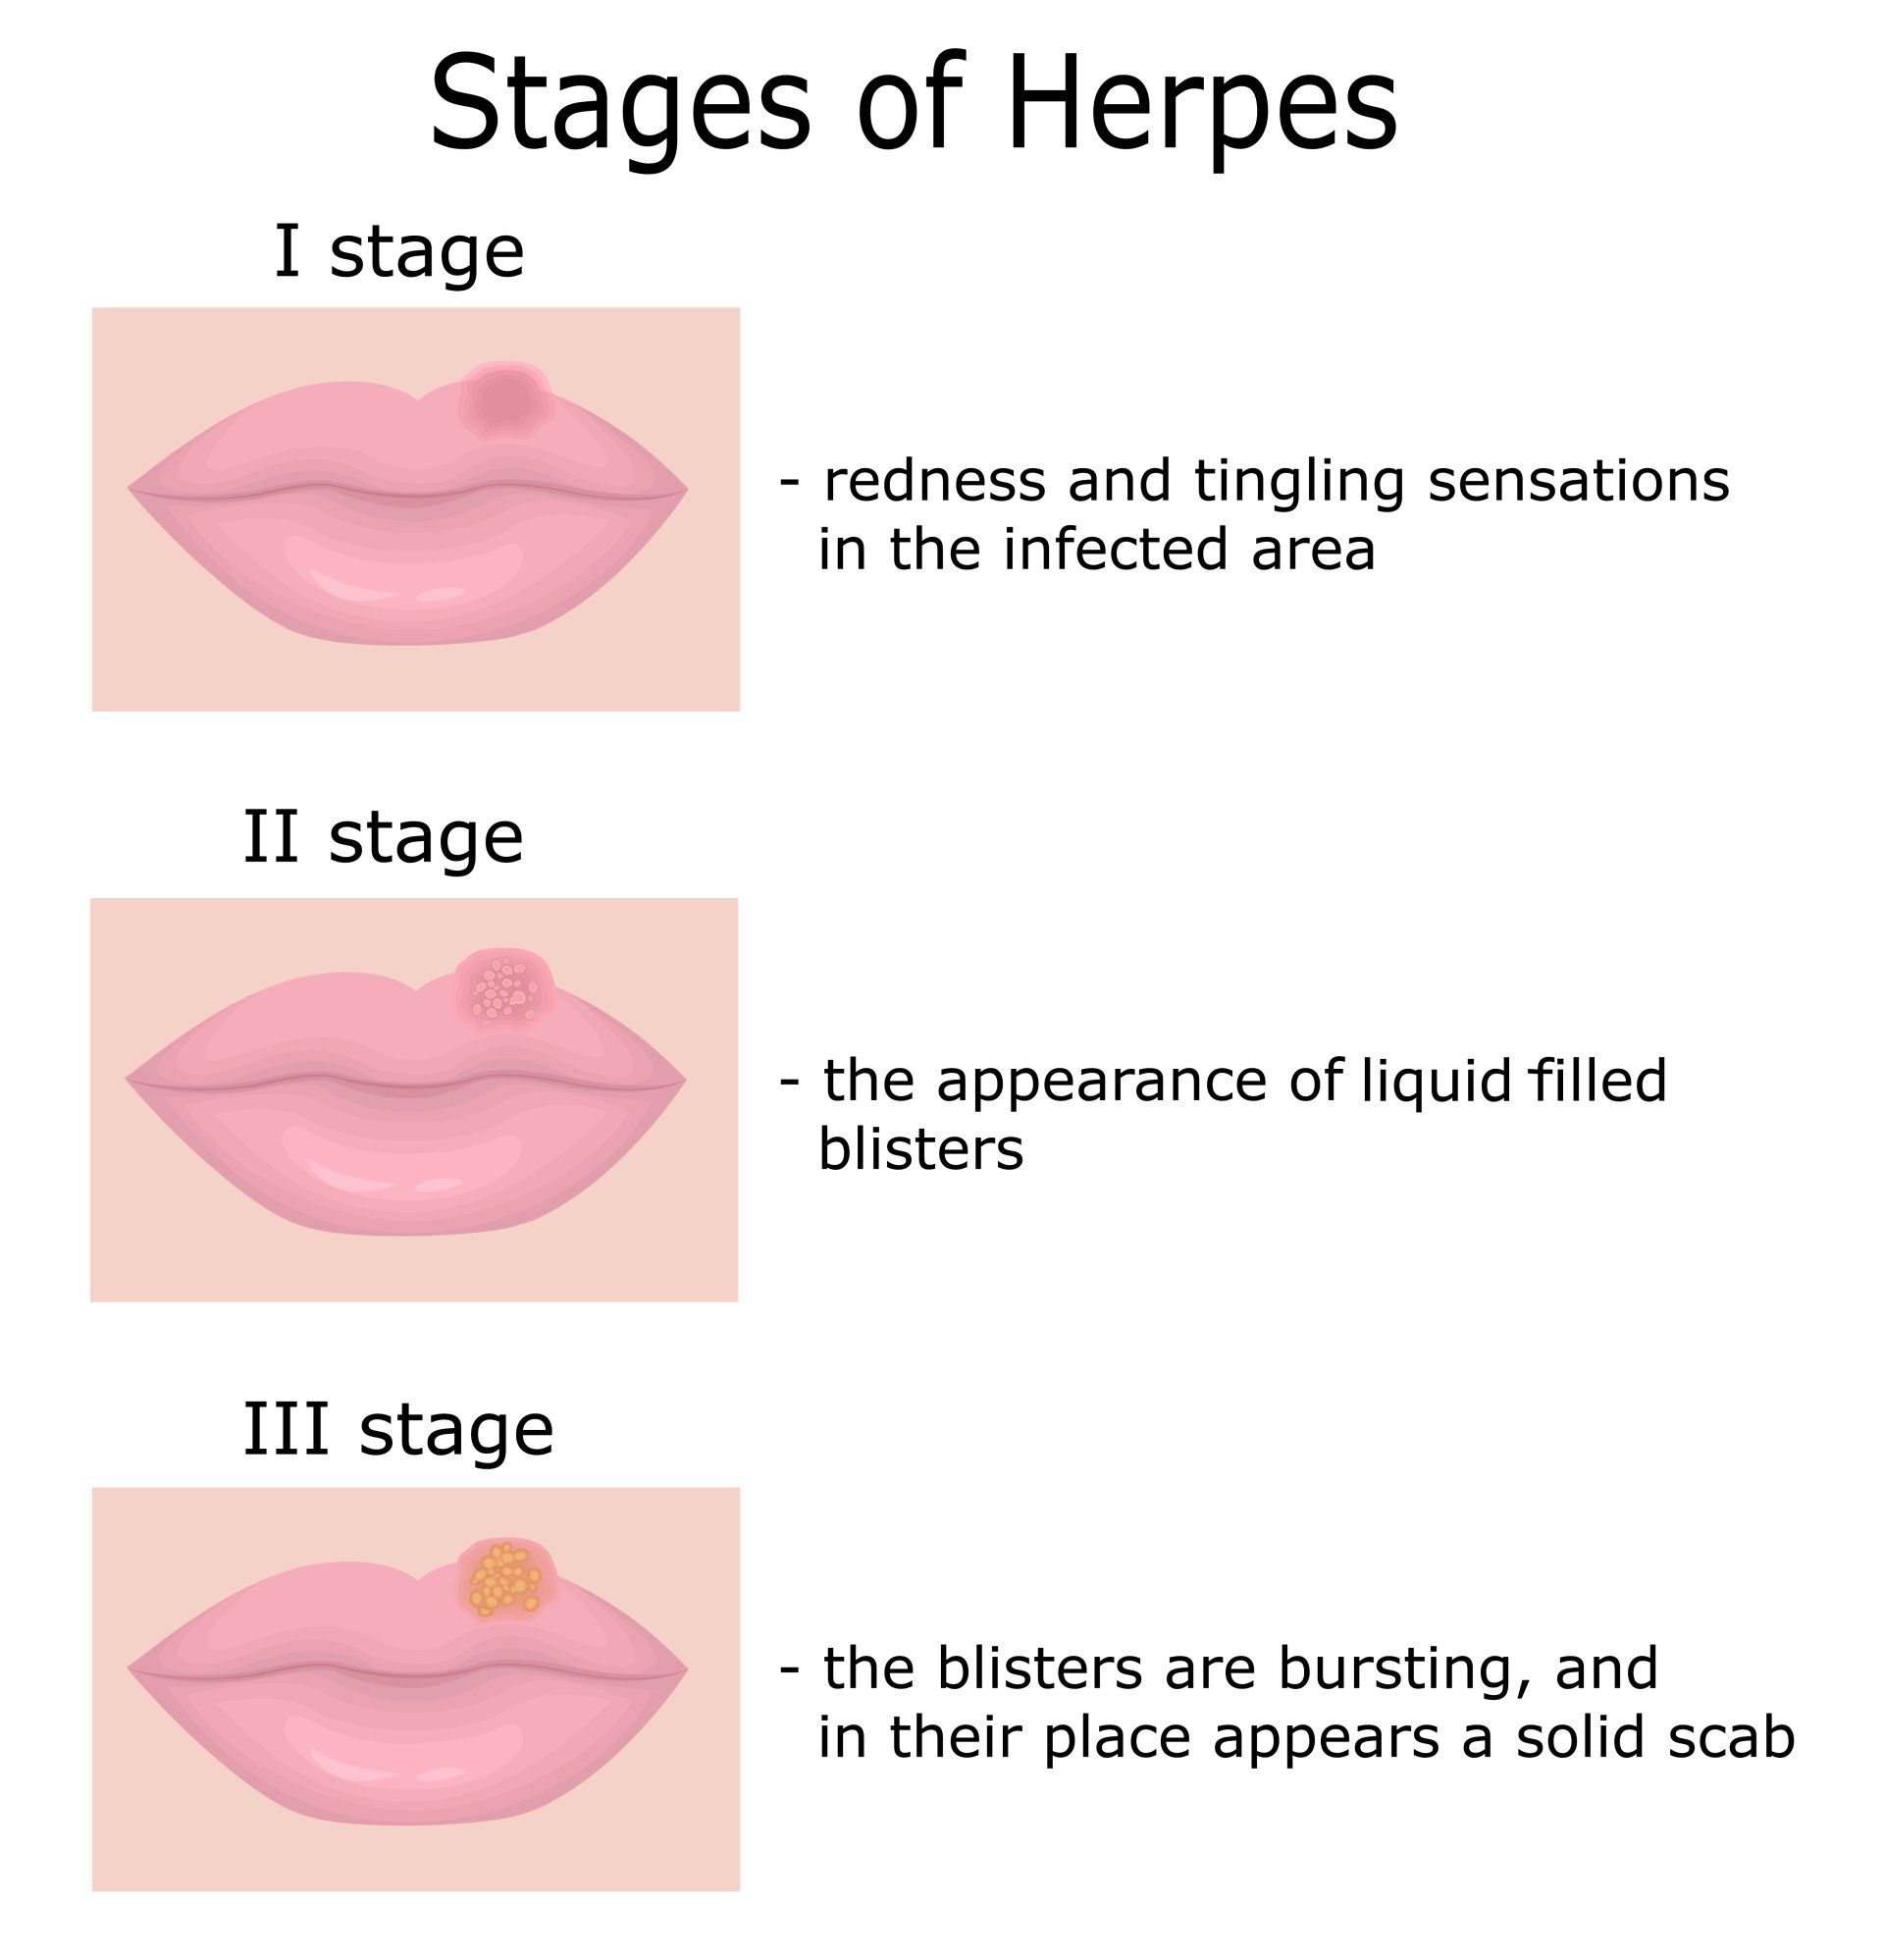 Stages of Herpes Illustration